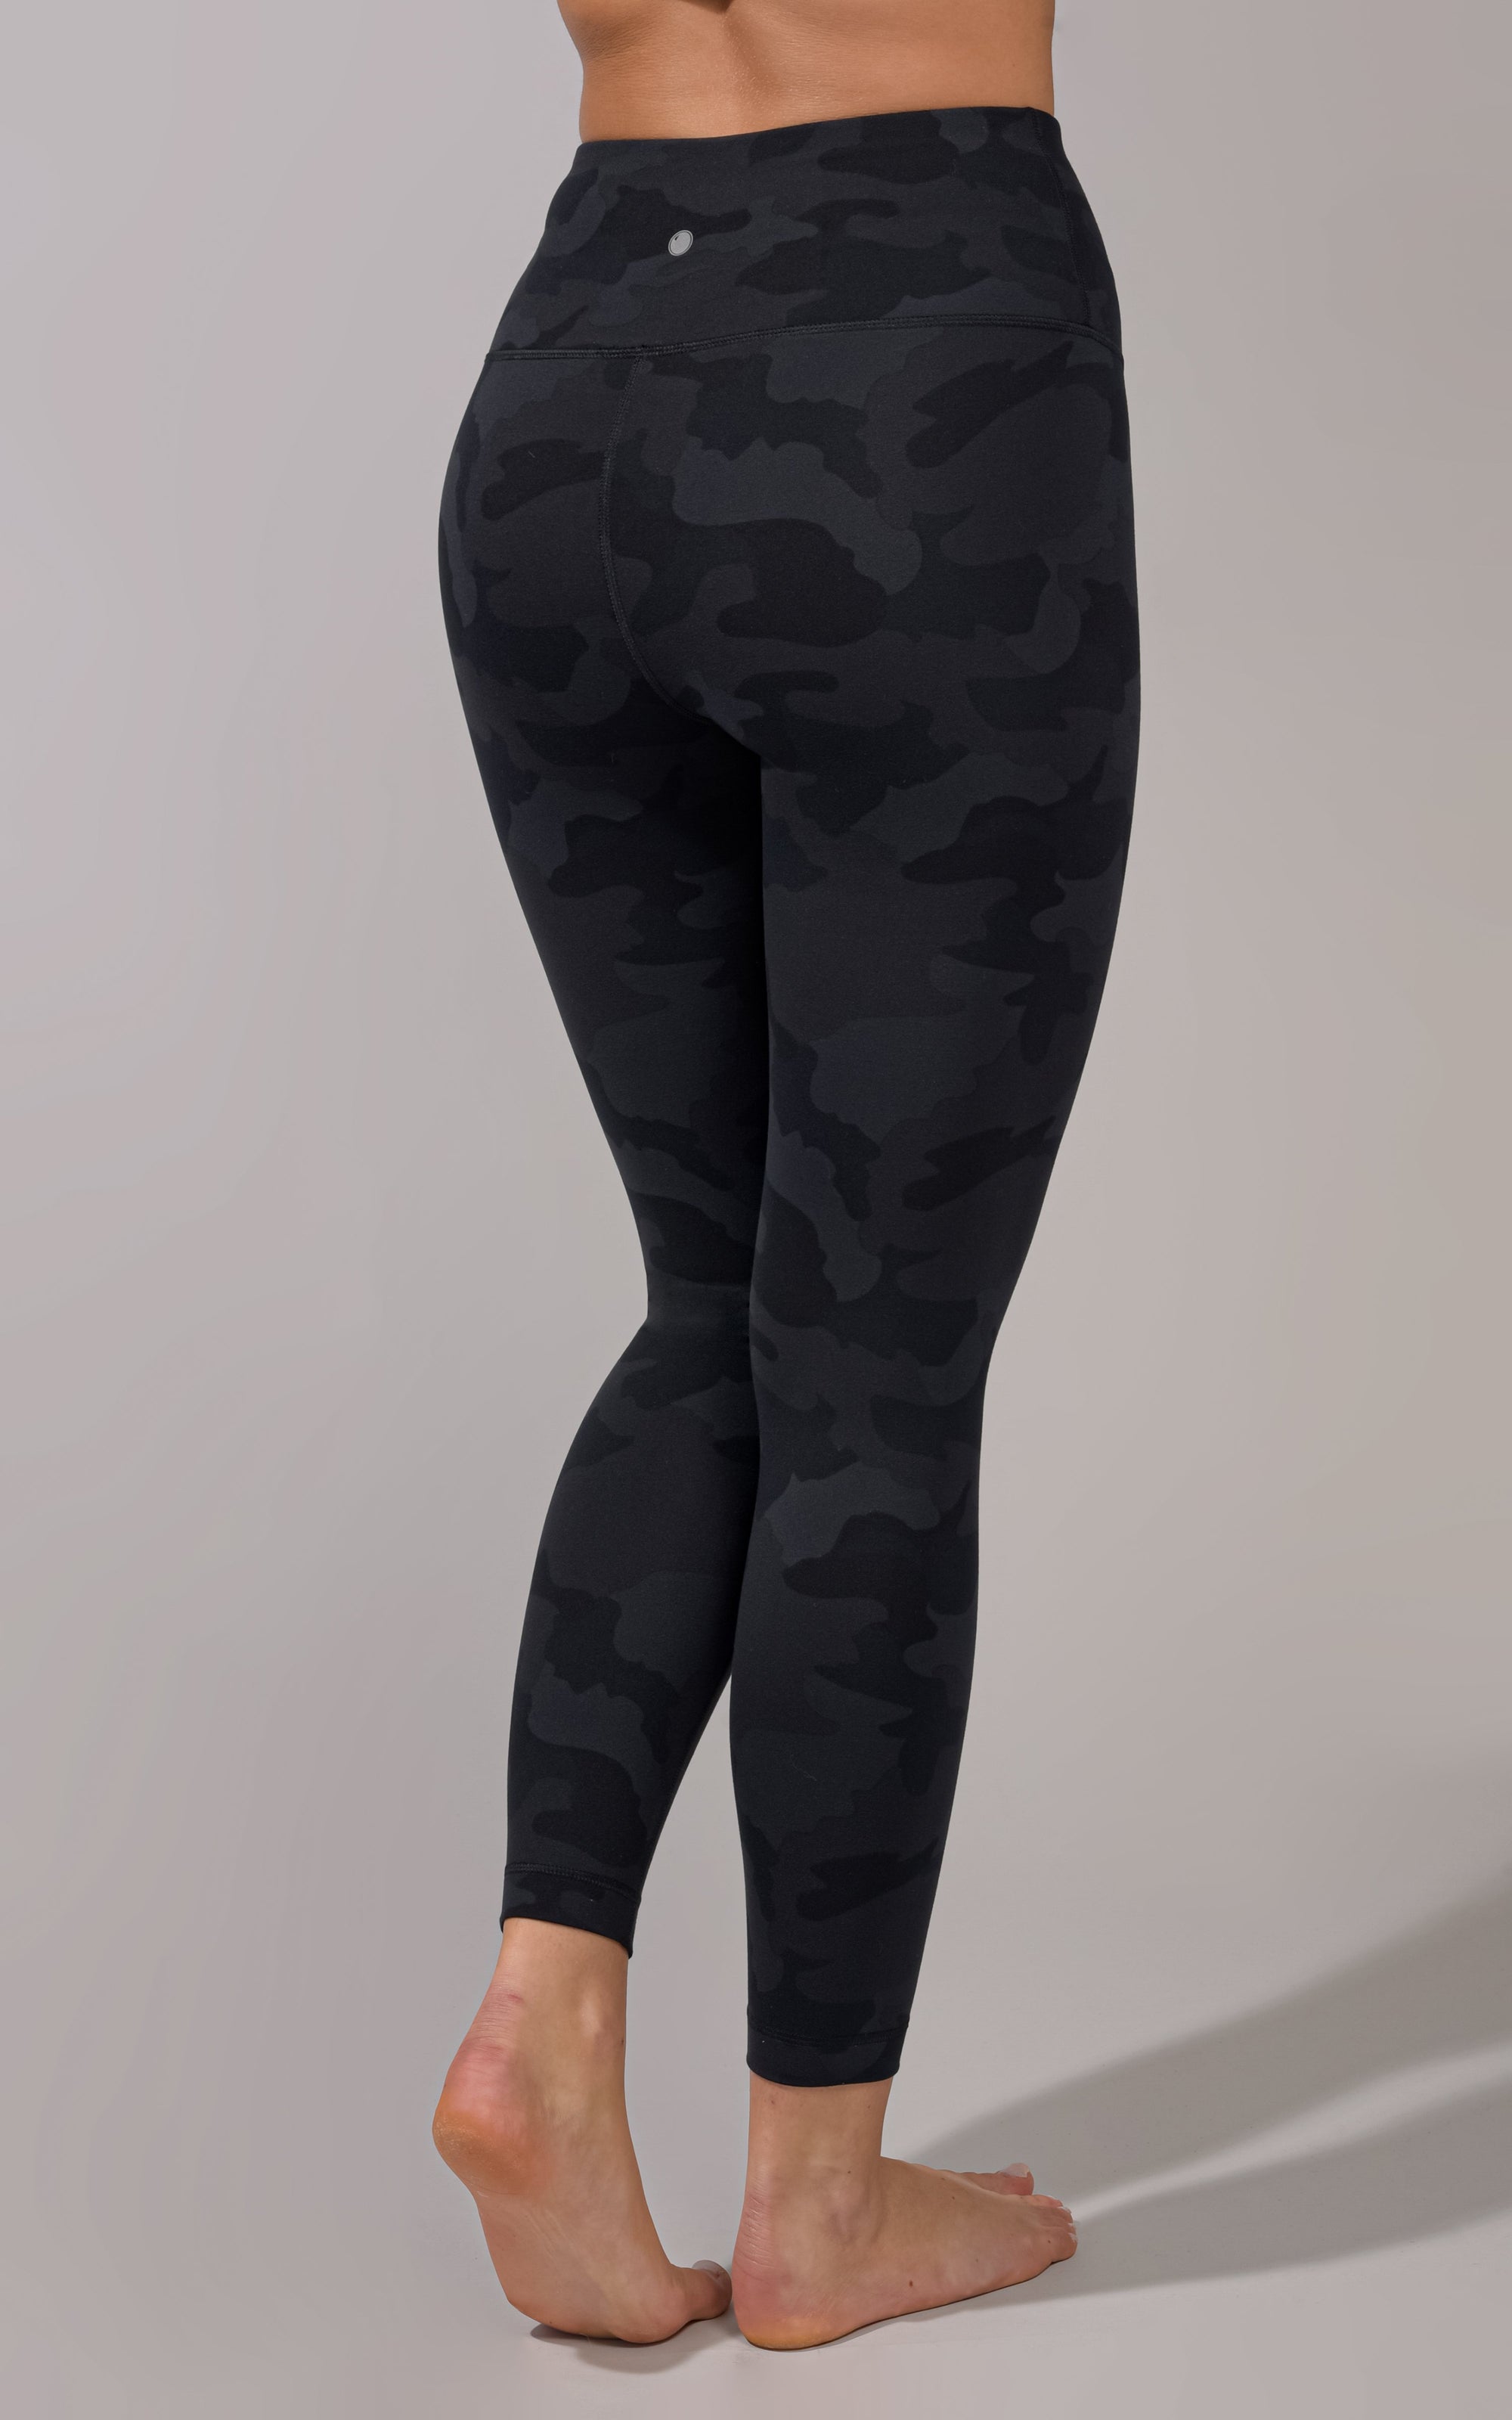 YUHAOTIN Yogalicious Lux Leggings Women Casual High Waist Camo Slim Fit  Button Stitching Jeans Leggings Black Yoga Pants for Women with Pockets  Cotton